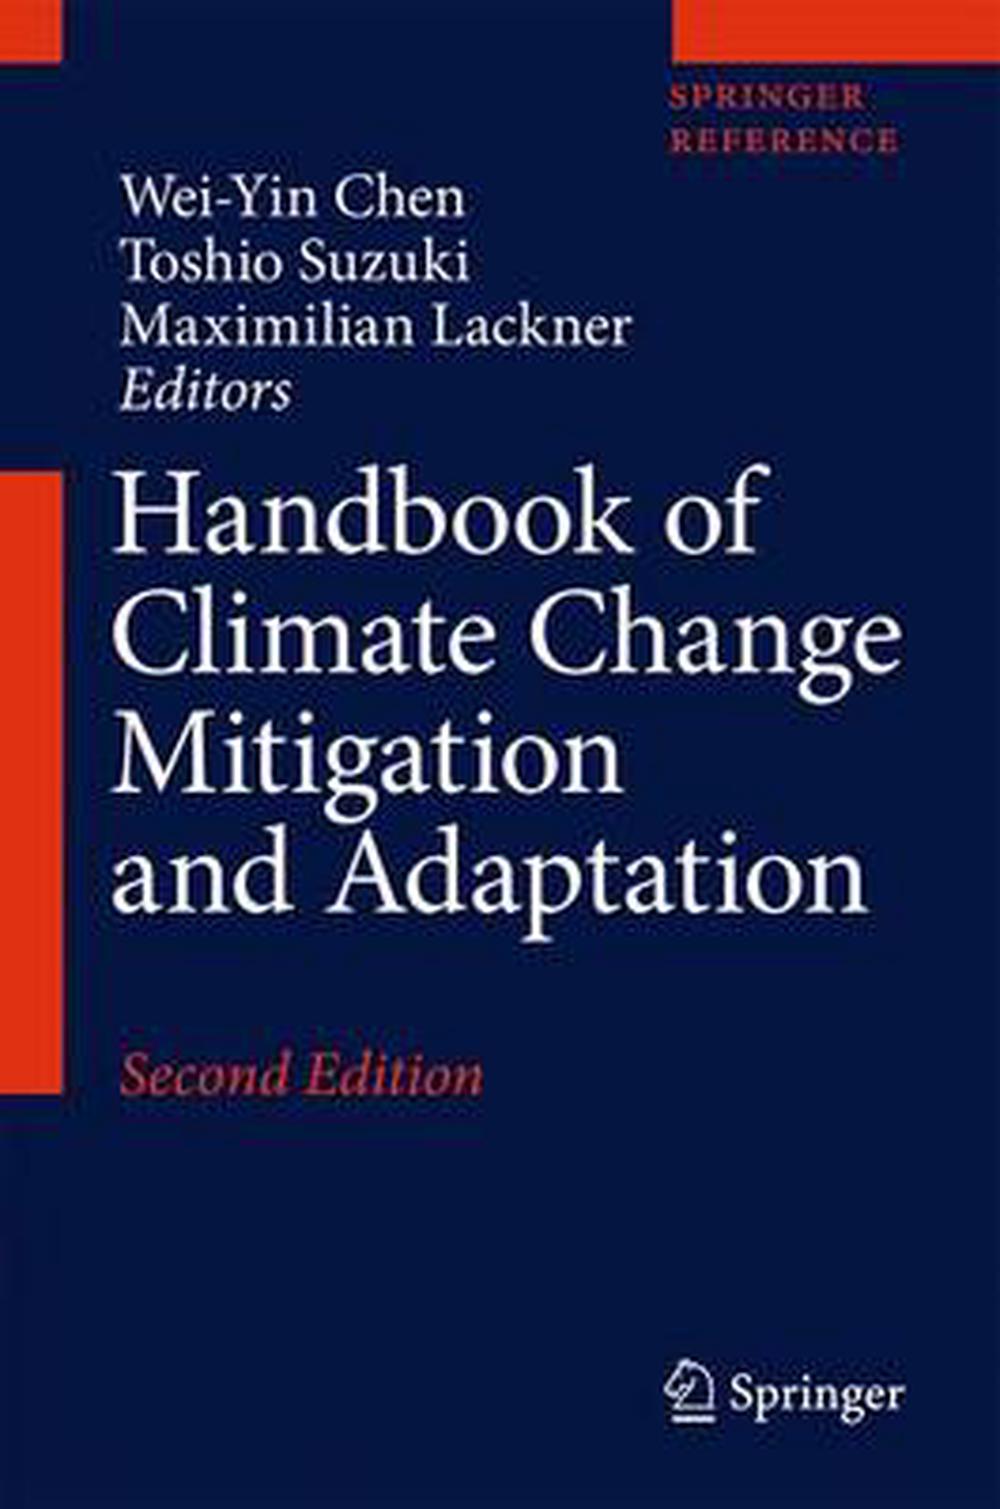 research handbook on climate change mitigation law 2022